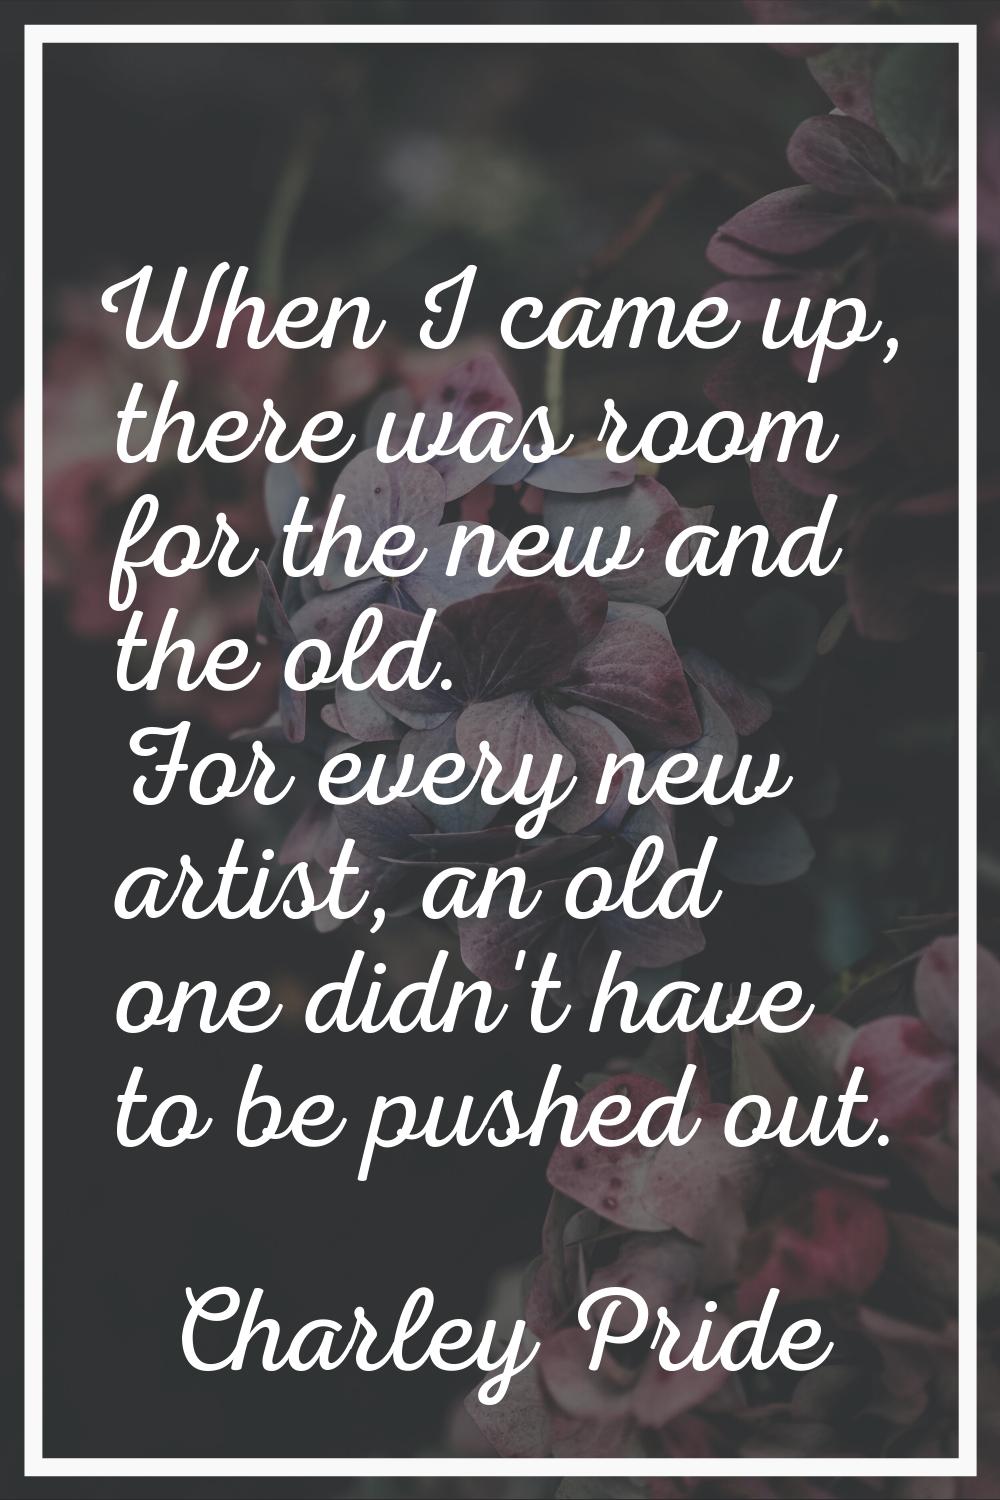 When I came up, there was room for the new and the old. For every new artist, an old one didn't hav